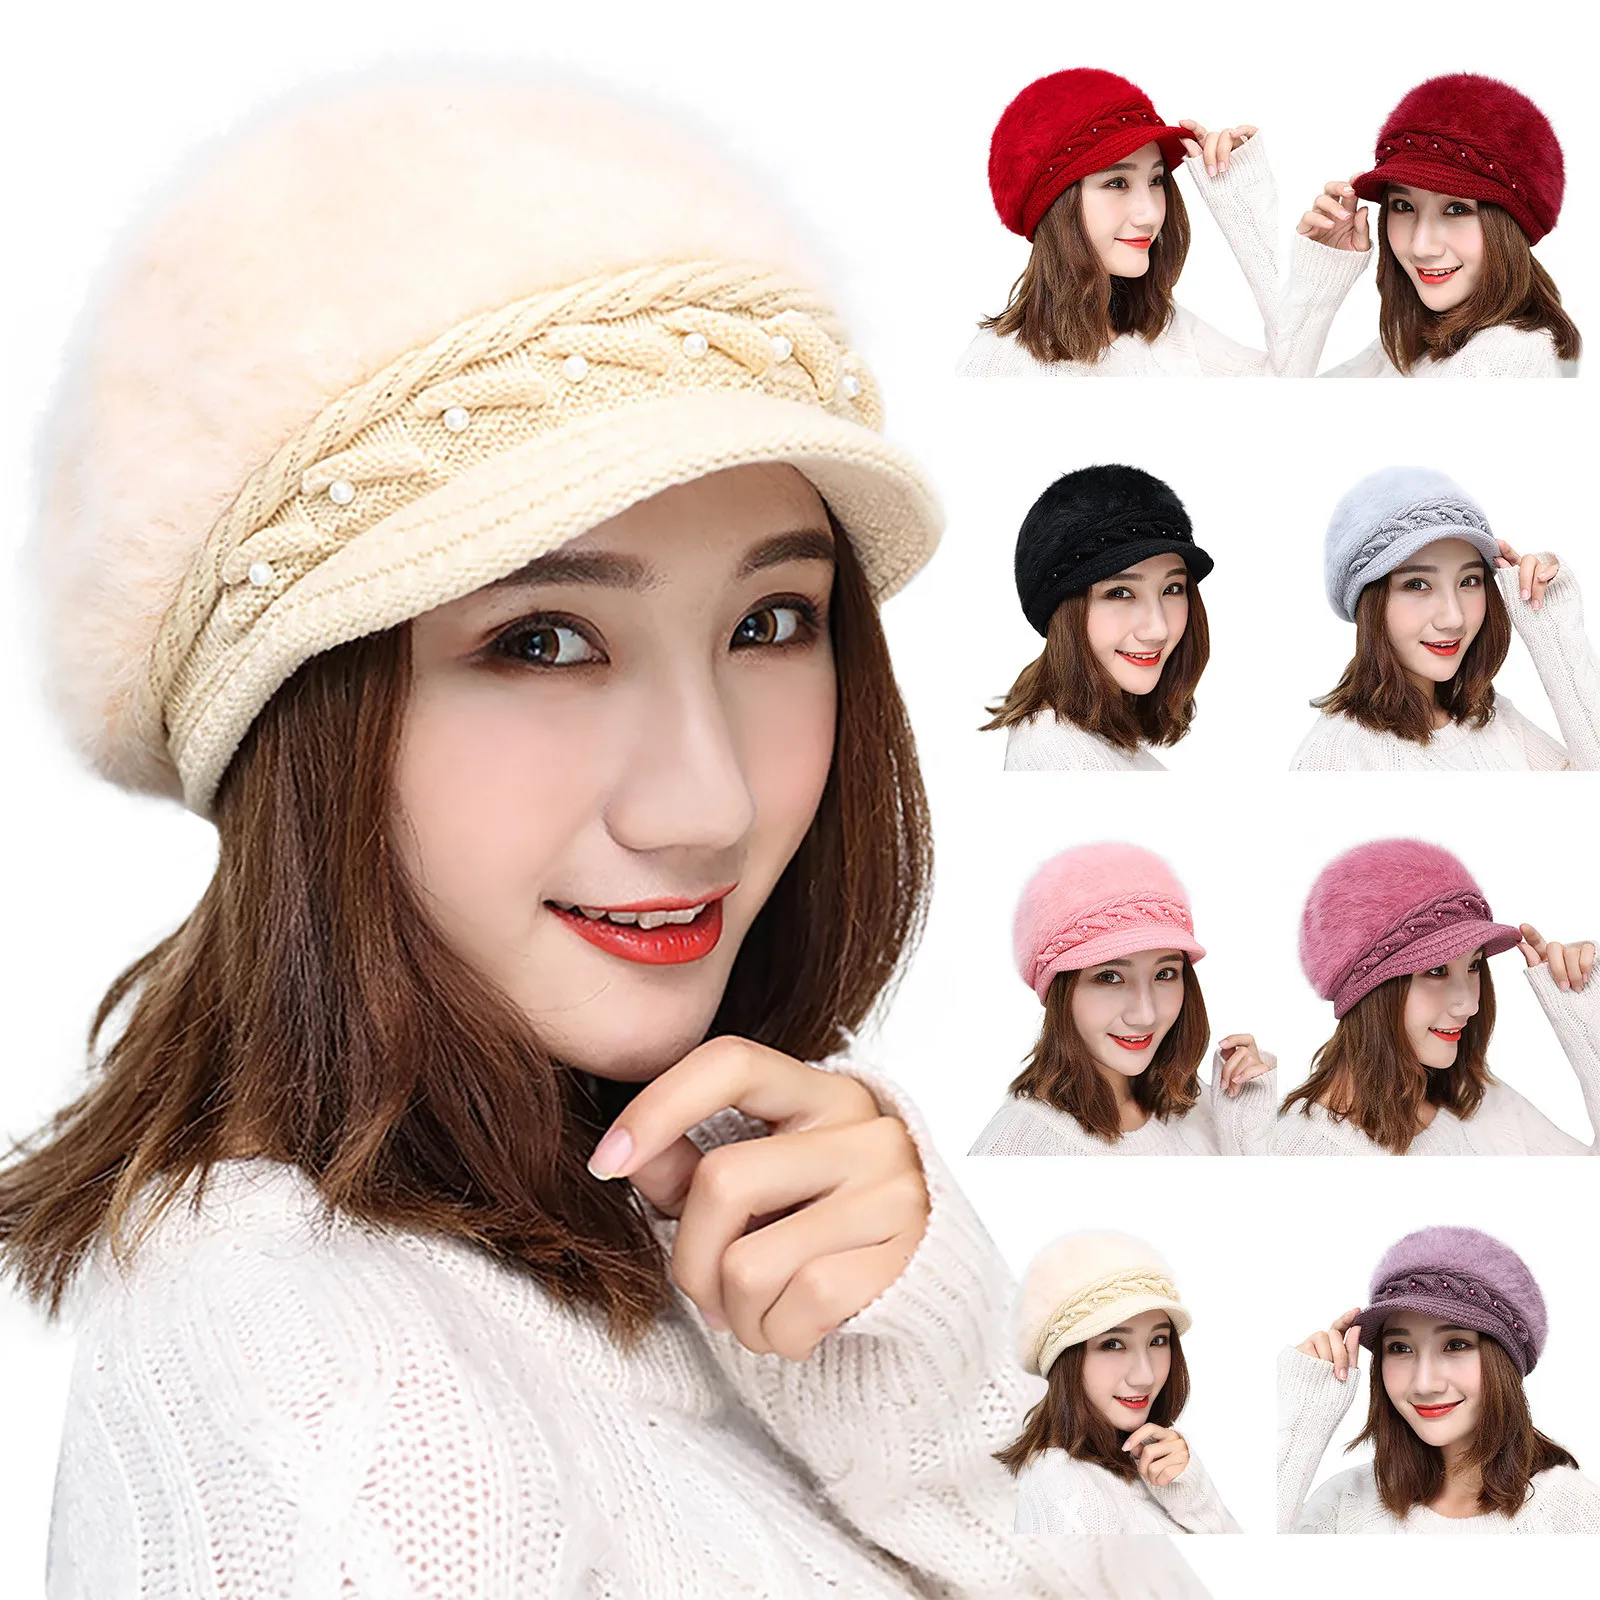 

Berets Caps For Women Winter Outdoor Warm Solid Knitted Hat Beret Baggy Beanie Hat Slouch Ski Cap Gorros Female беѬе женский 5*